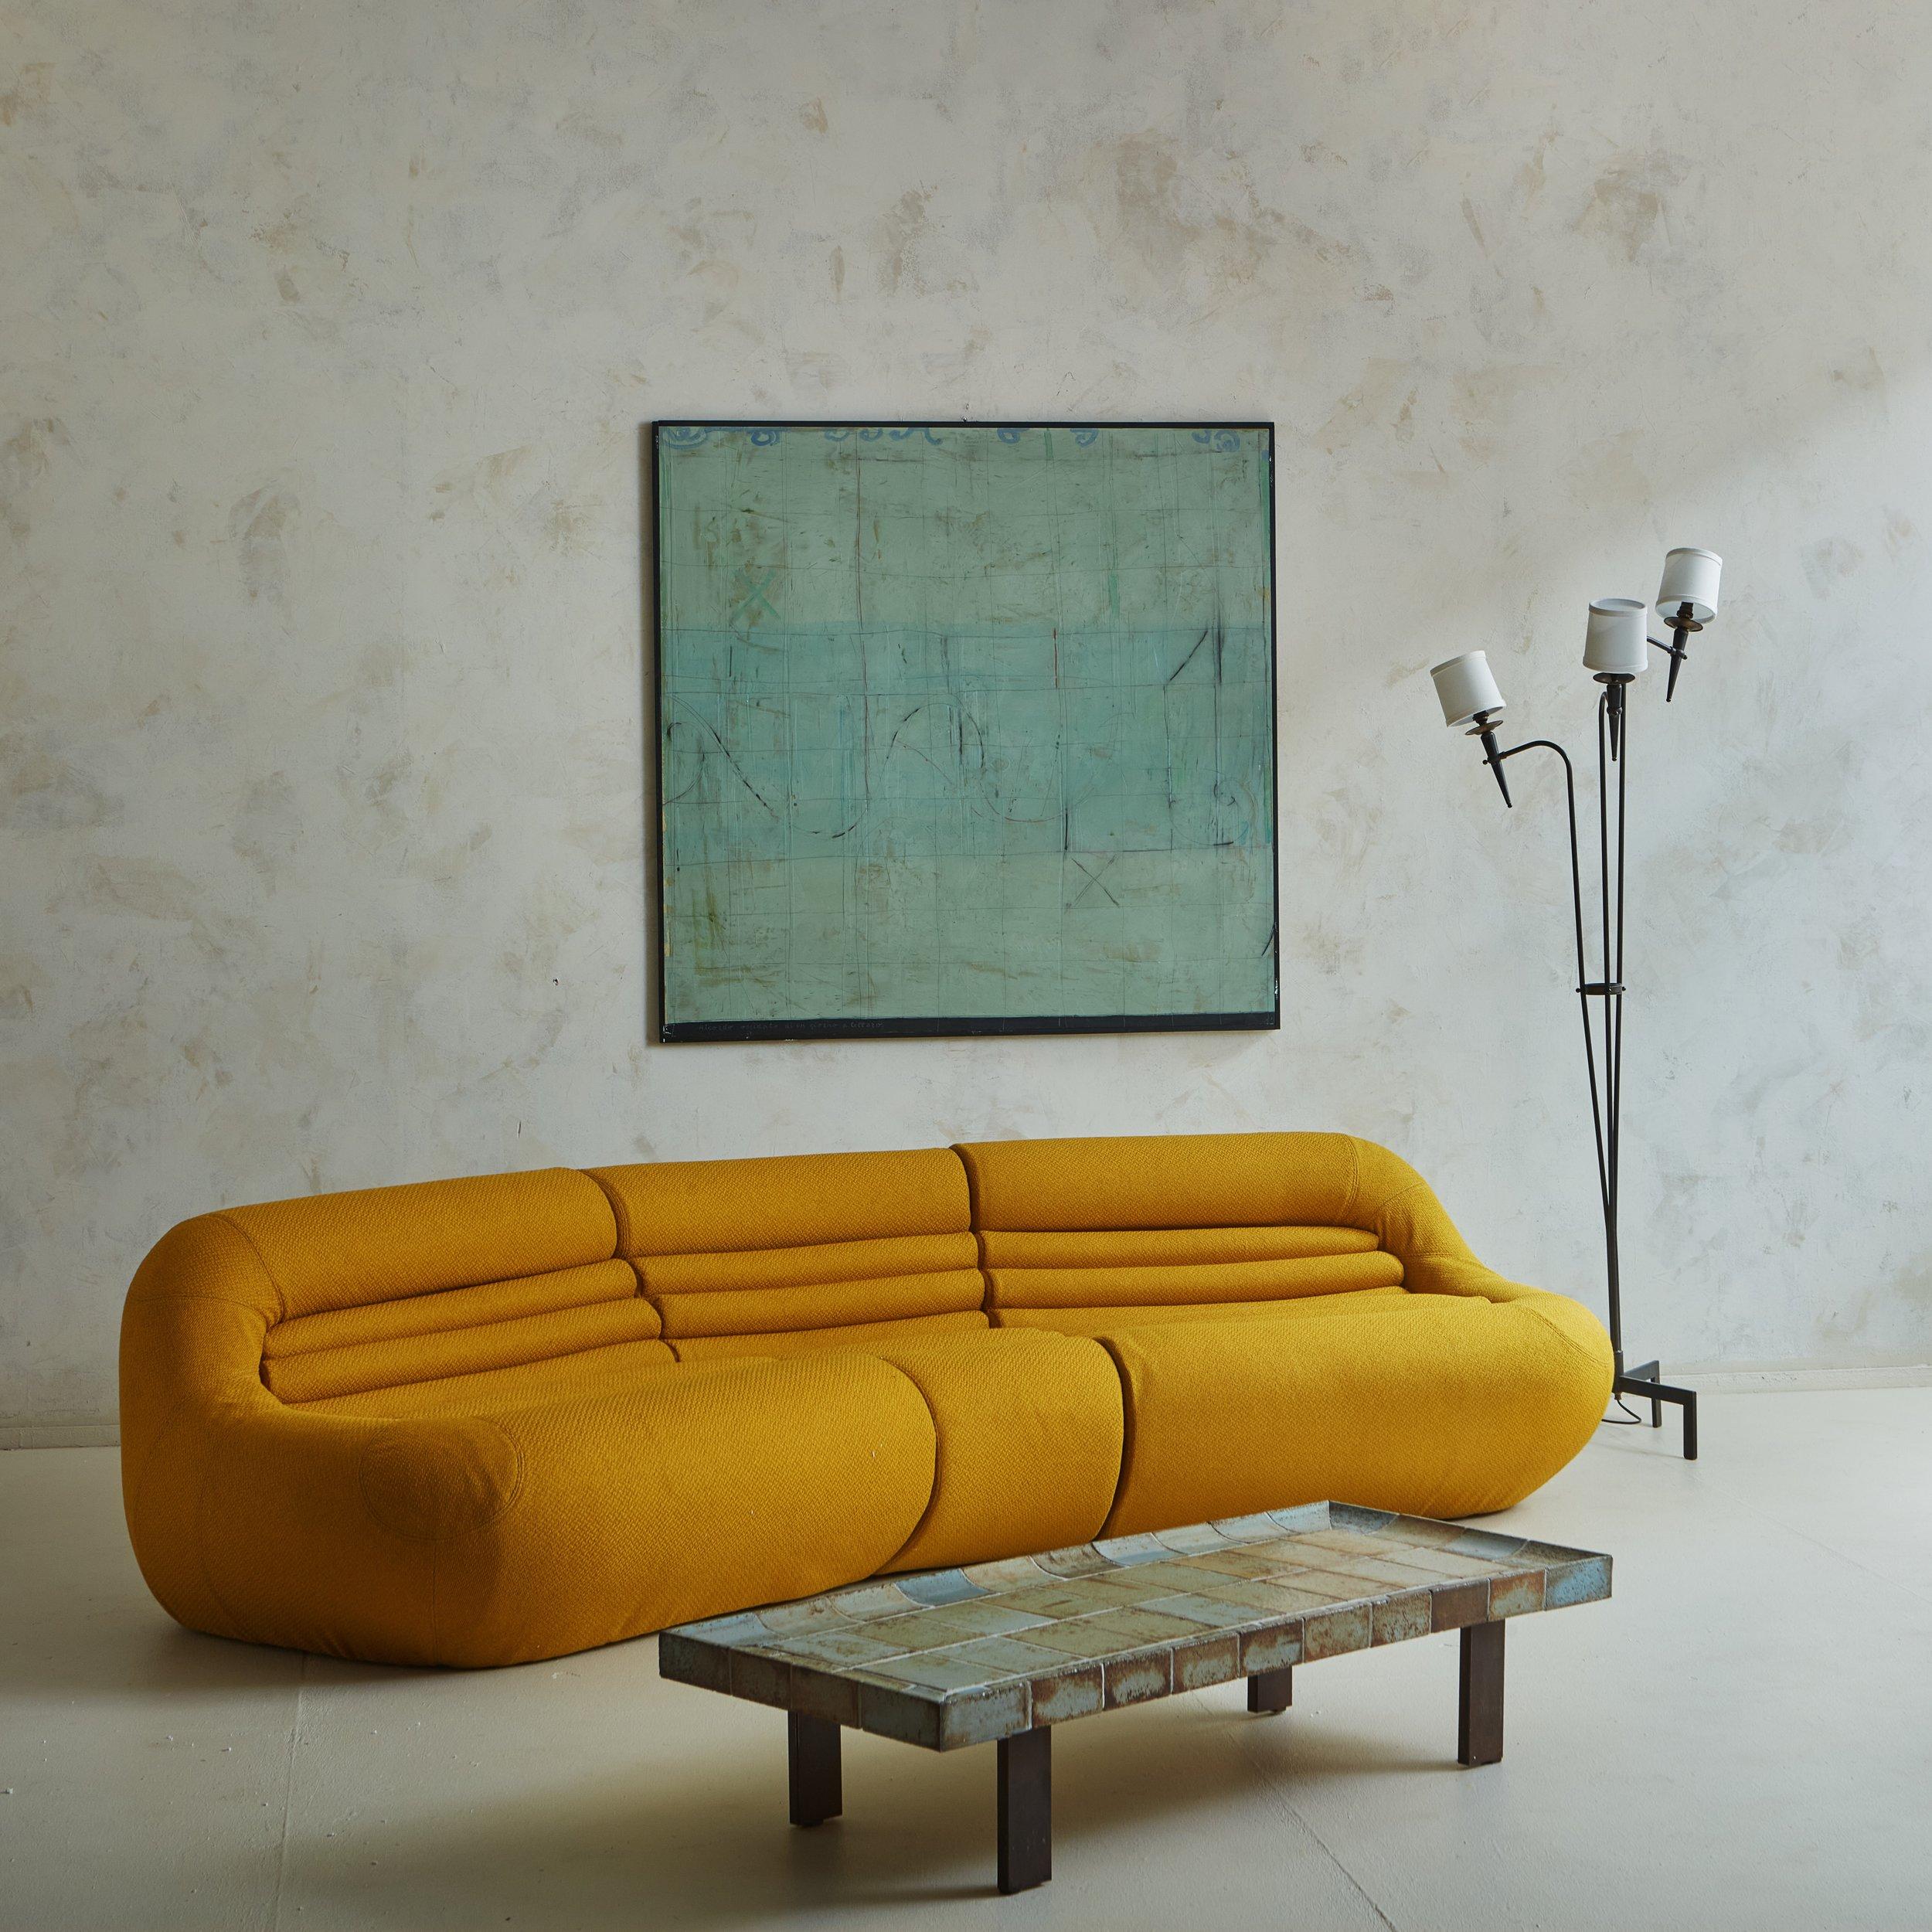 A rare three piece Carrera modular sofa designed by Jonathan De Pas, Donato D’Urbino and Paolo Lomazzi for BBB Bonacina Italia in 1969. This stunning sofa has two curved corner sections and one center section with ribbed seat detailing. It